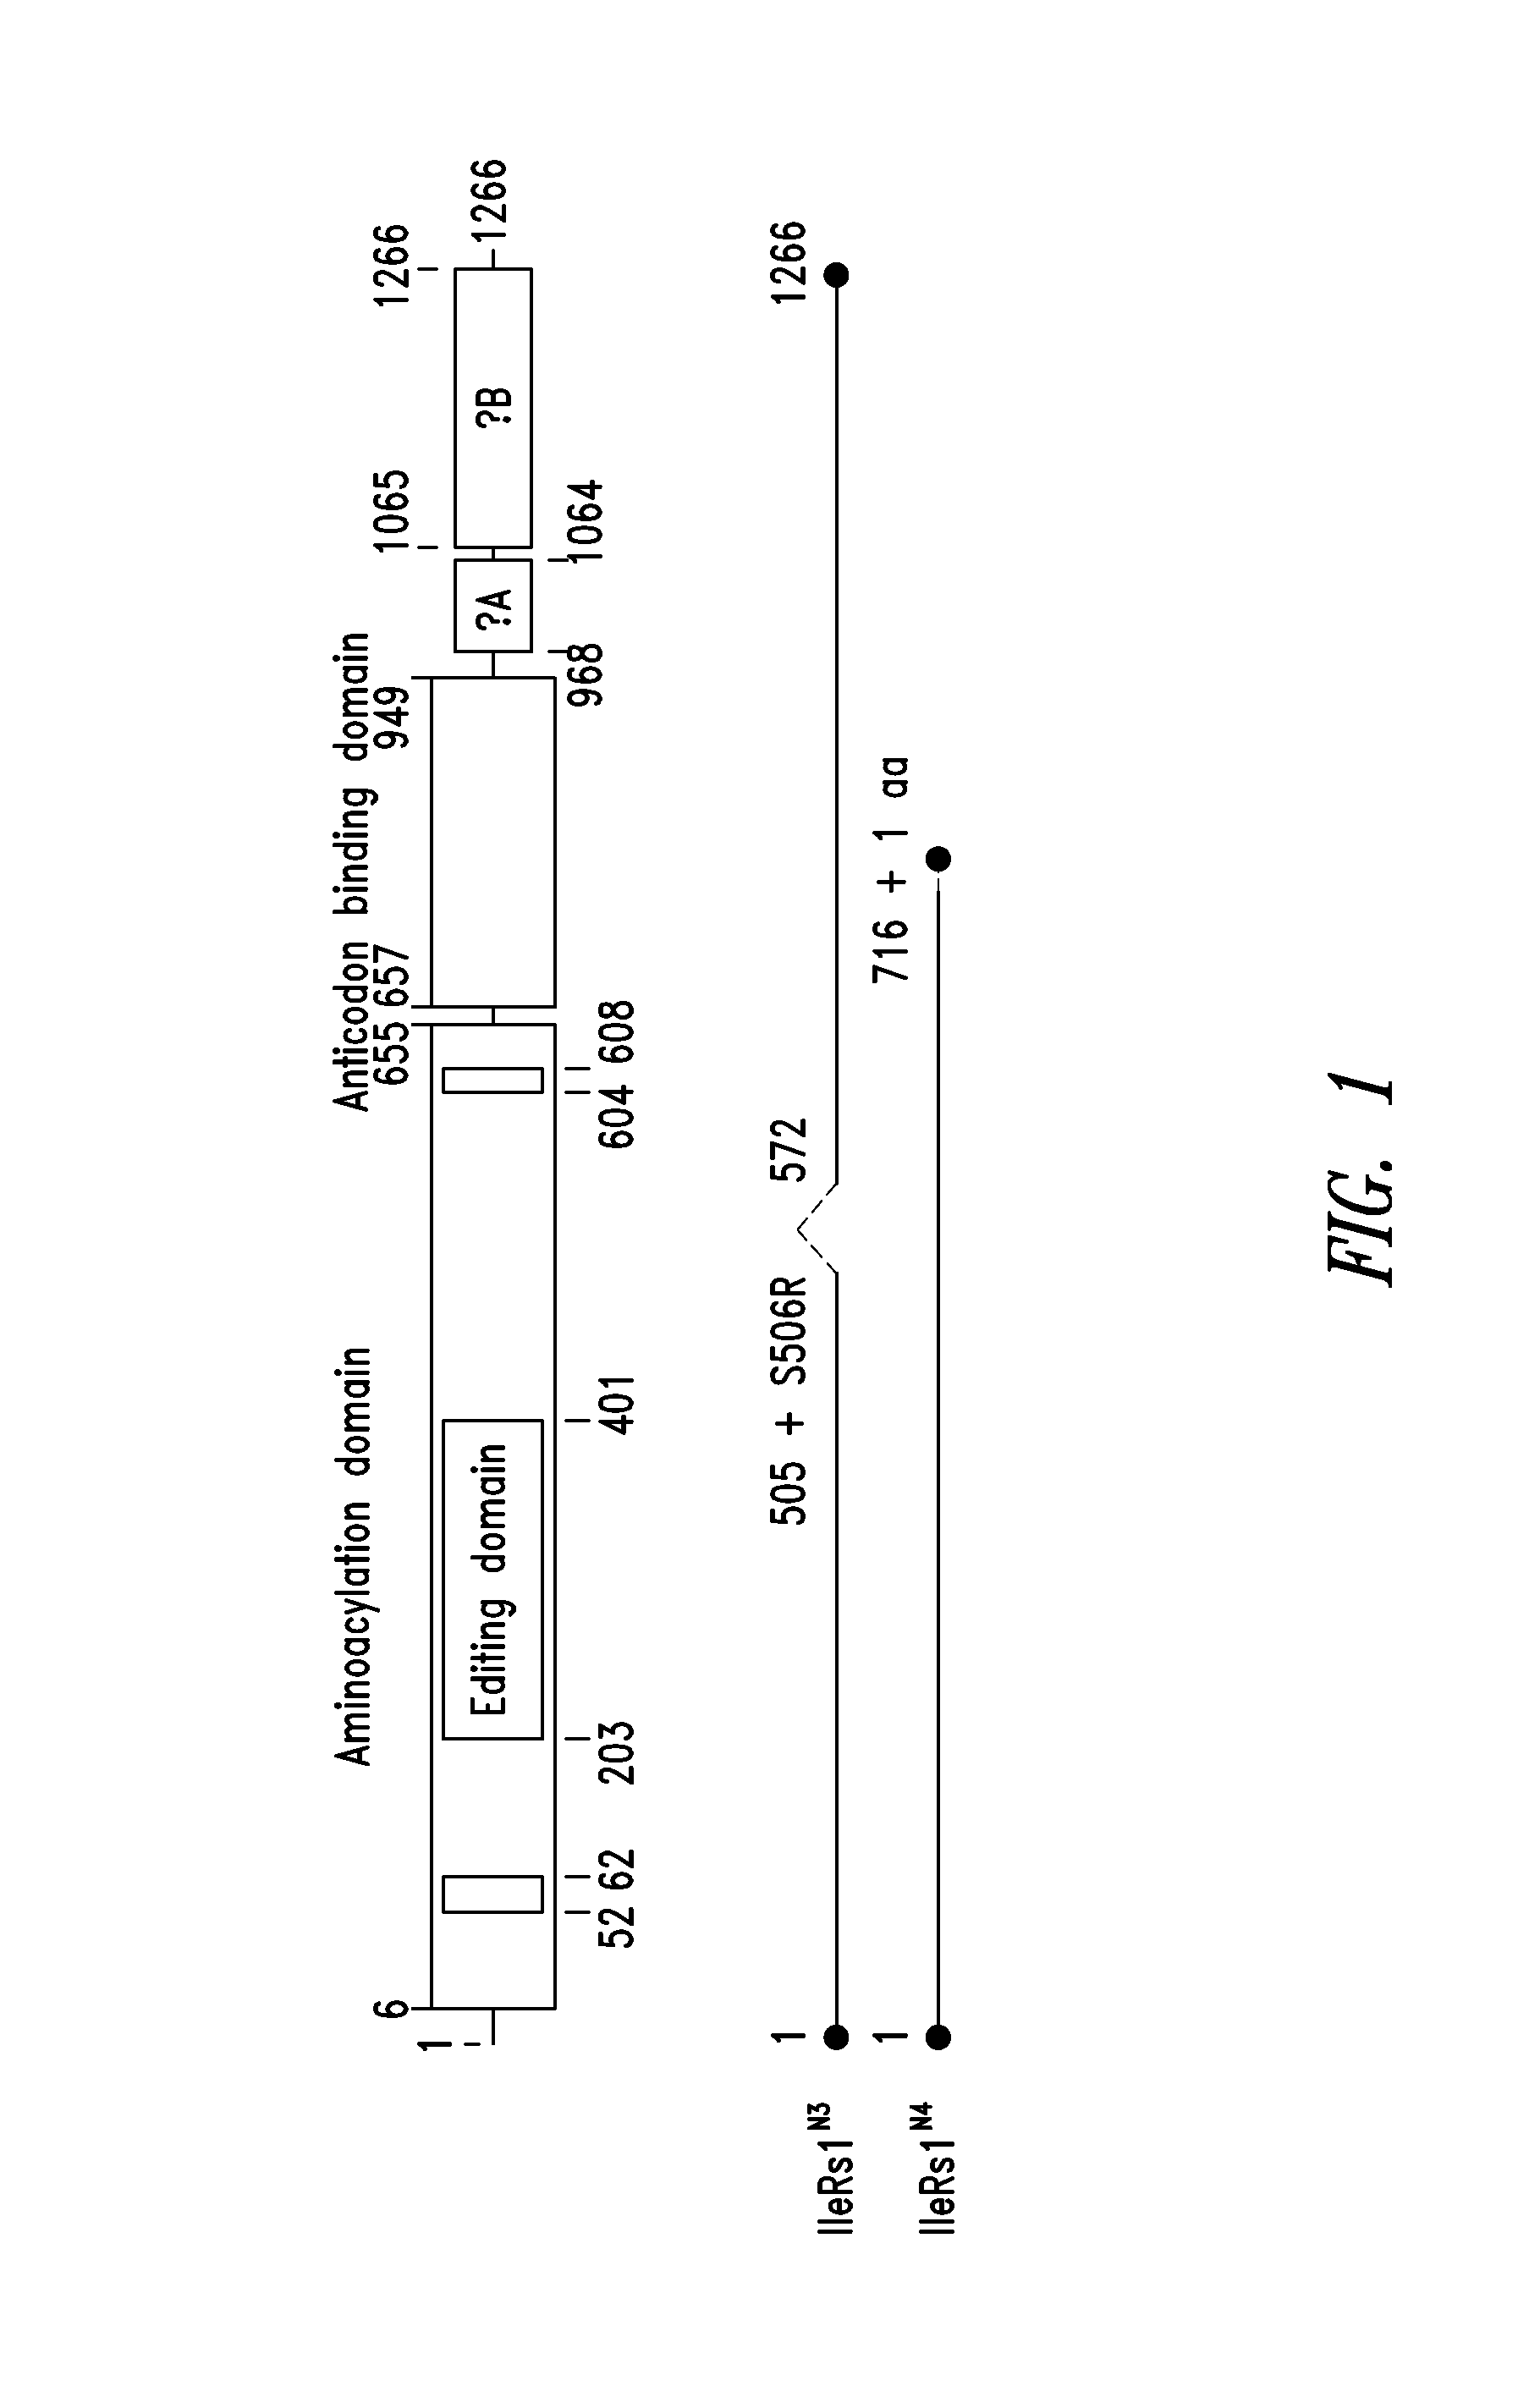 Innovative discovery of therapeutic, diagnostic, and antibody compositions related to protein fragments of isoleucyl tRNA synthetases